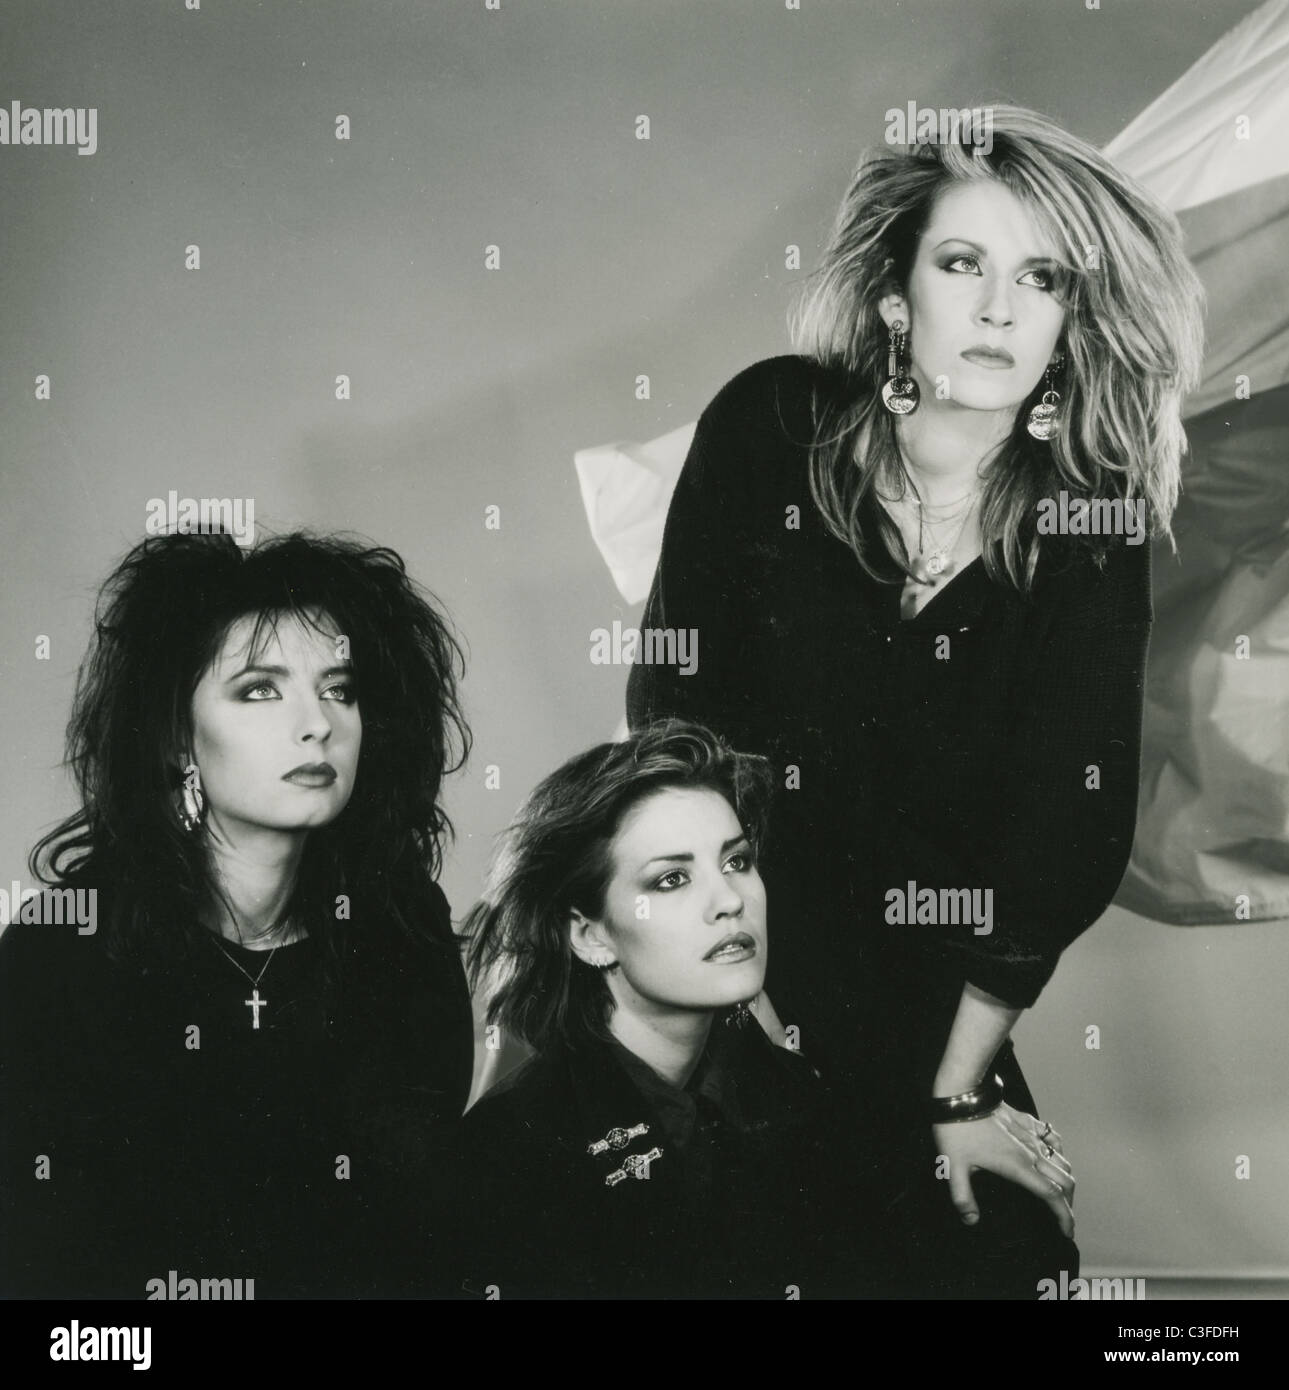 BANANARAMA Promotional photo of UK pop group about 1983. From l: Keren  Woodward, Siobahn Fahey and Sarah Dallin Stock Photo - Alamy